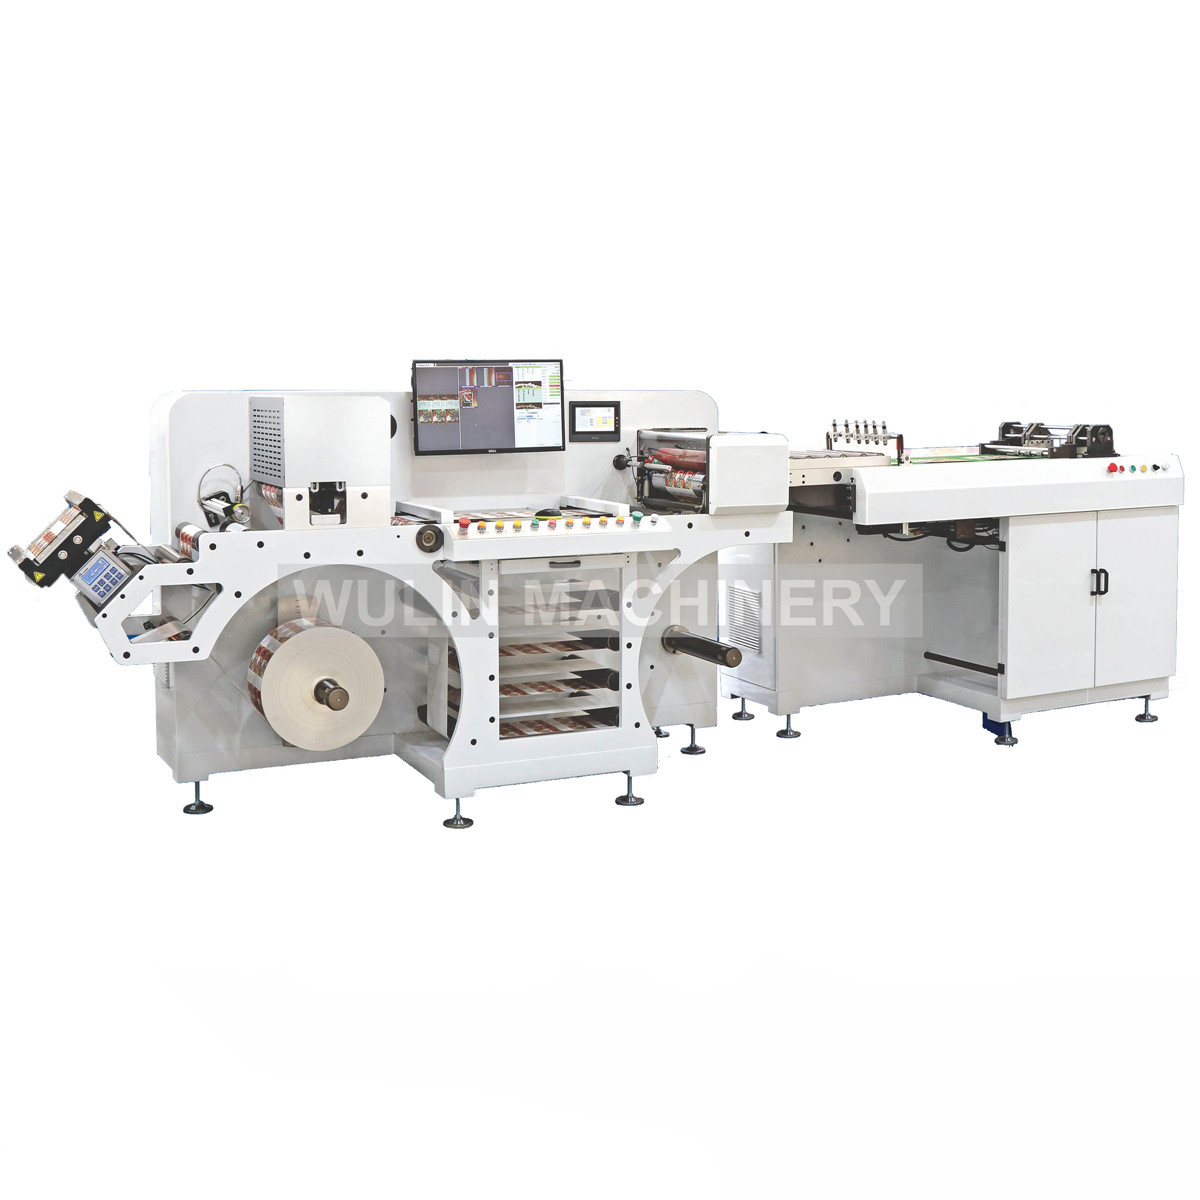 WL-370ISS Inspection & Sheeting Machine